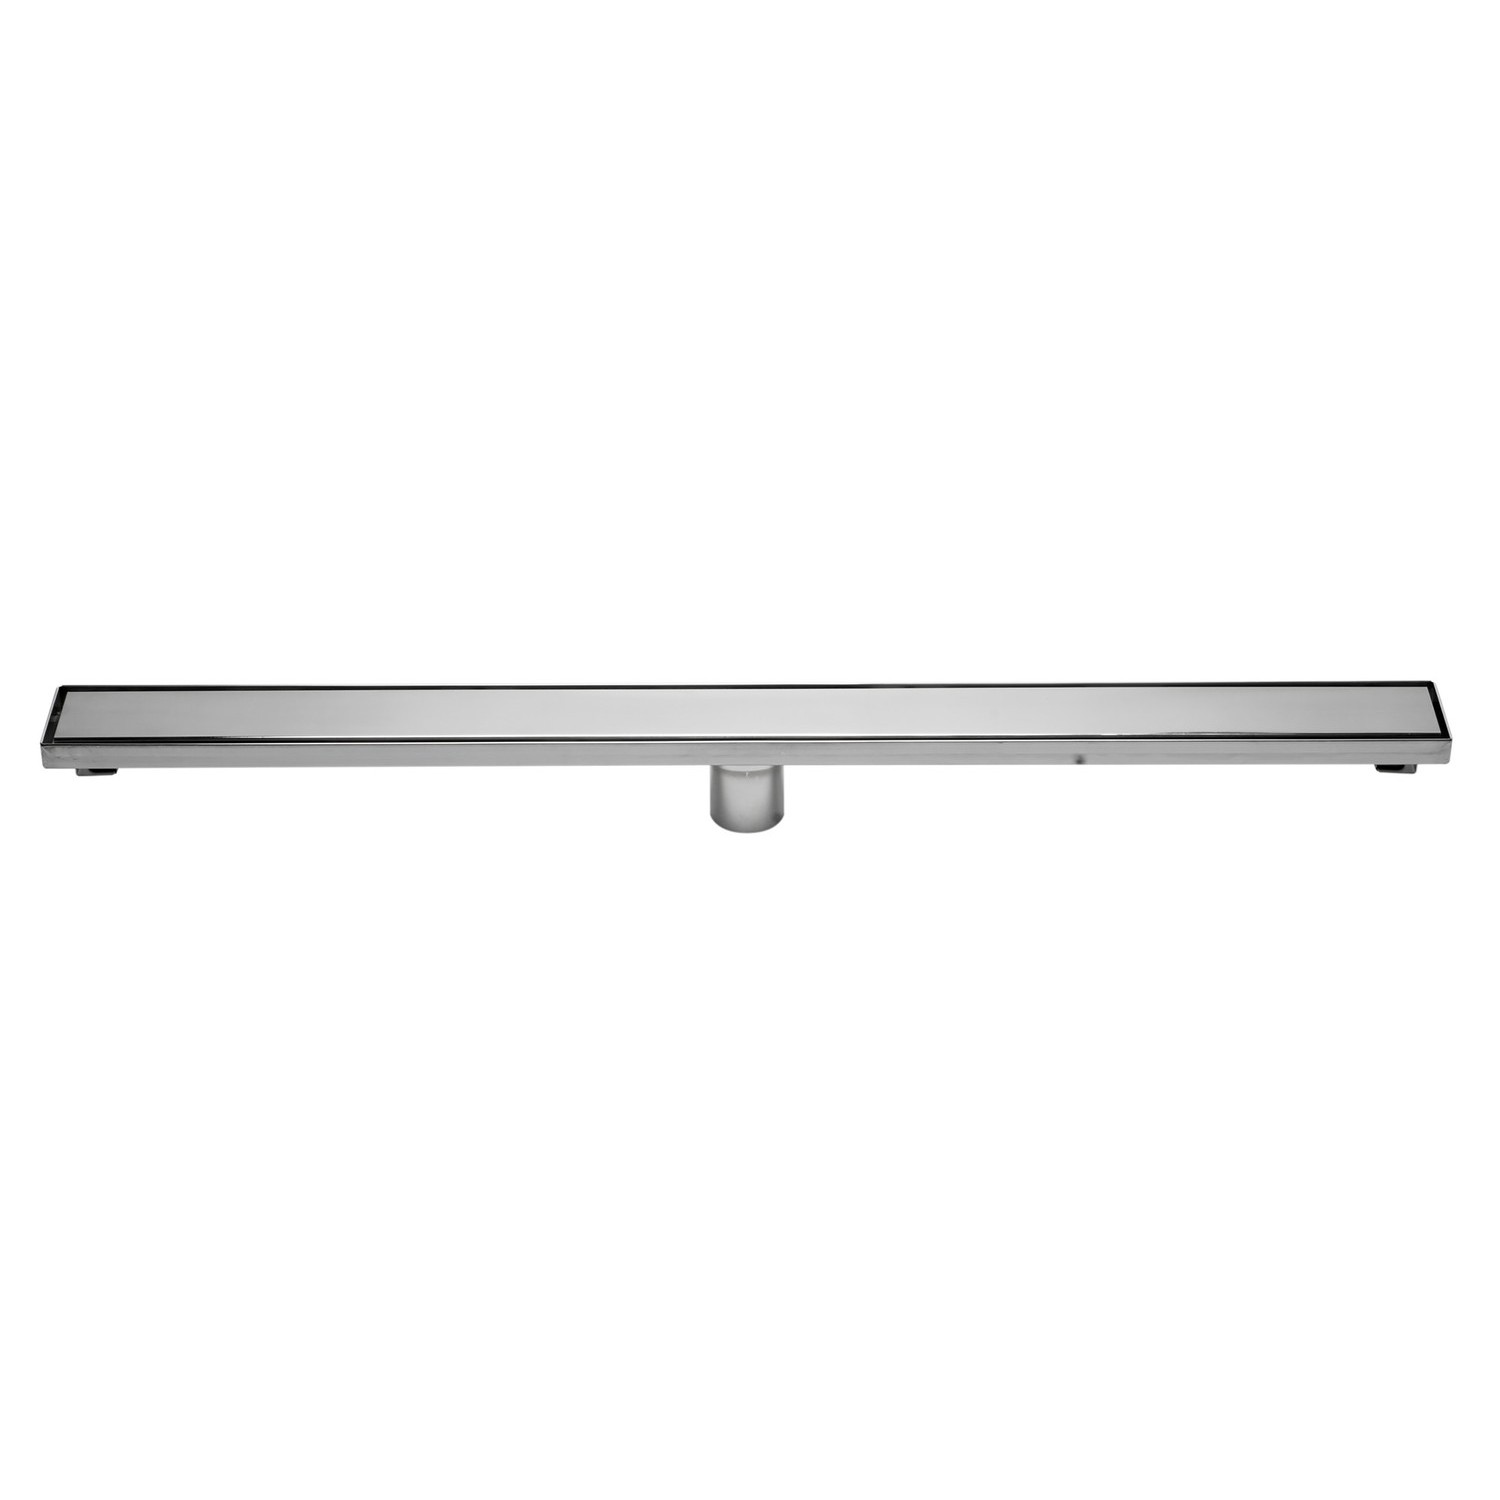 ALFI brand ABLD36B-PSS 36" Modern Polished Stainless Steel Linear Shower Drain with Solid Cover